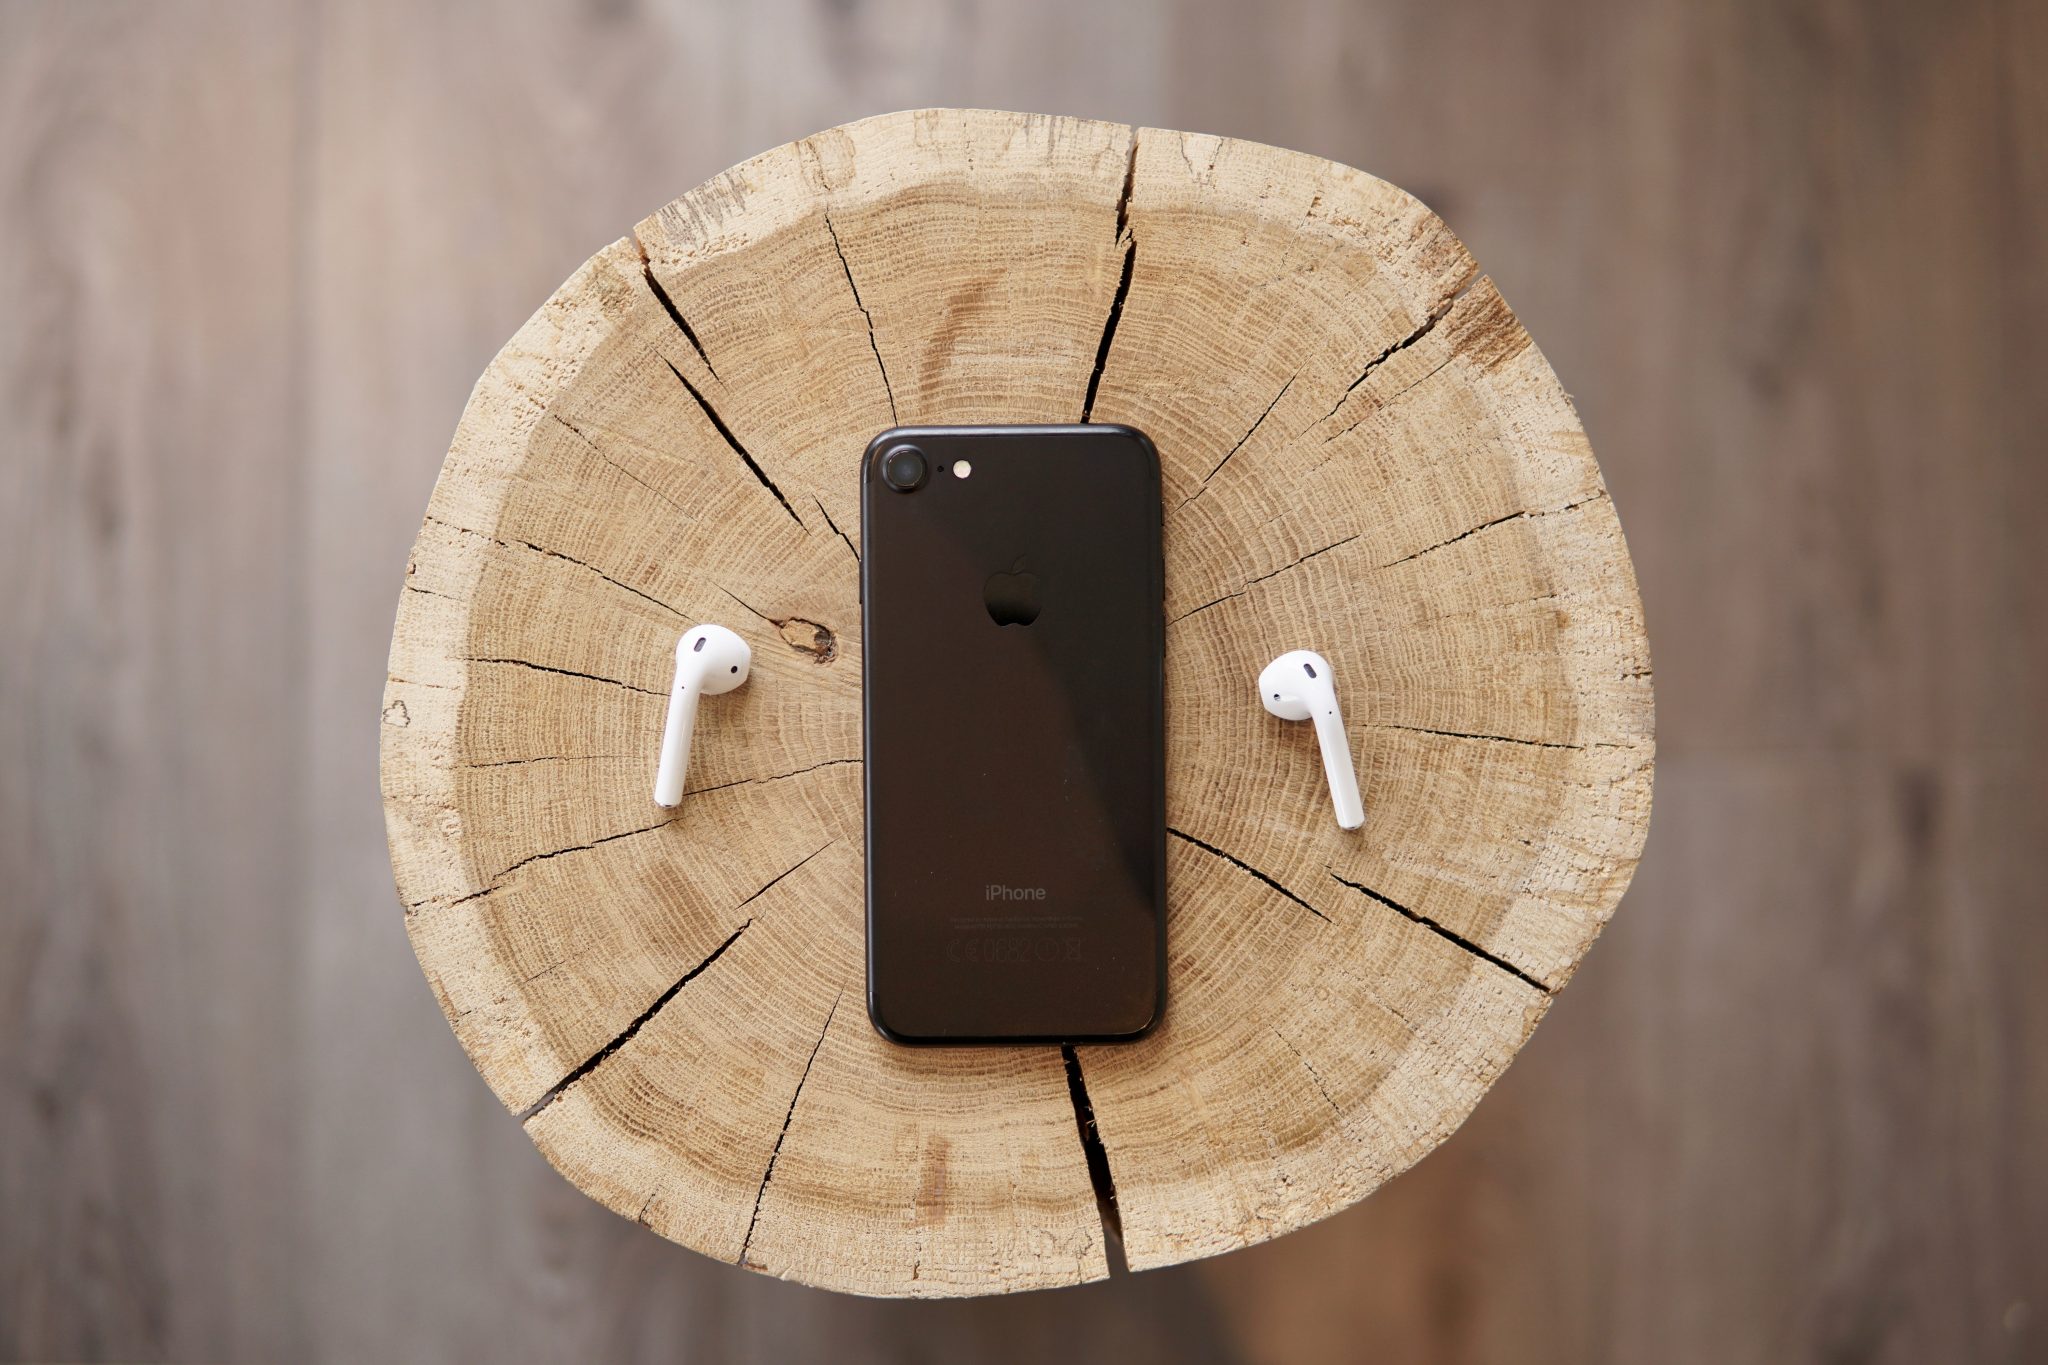 The new version is centred around the Find My AirPods feature within the Find My iPhone app. AirPods owners will be able to locate them by using the iCloud-based feature to call upon the wireless pods to play a sound. However, if AirPods are not Wi-Fi and GPS enabled, they’ll only be discoverable if they’re within Bluetooth range which is around only 5 metres. If they’re lost outside the home then it’ll be a case of trial and error, in the hope the Bluetooth connection can be resumed.